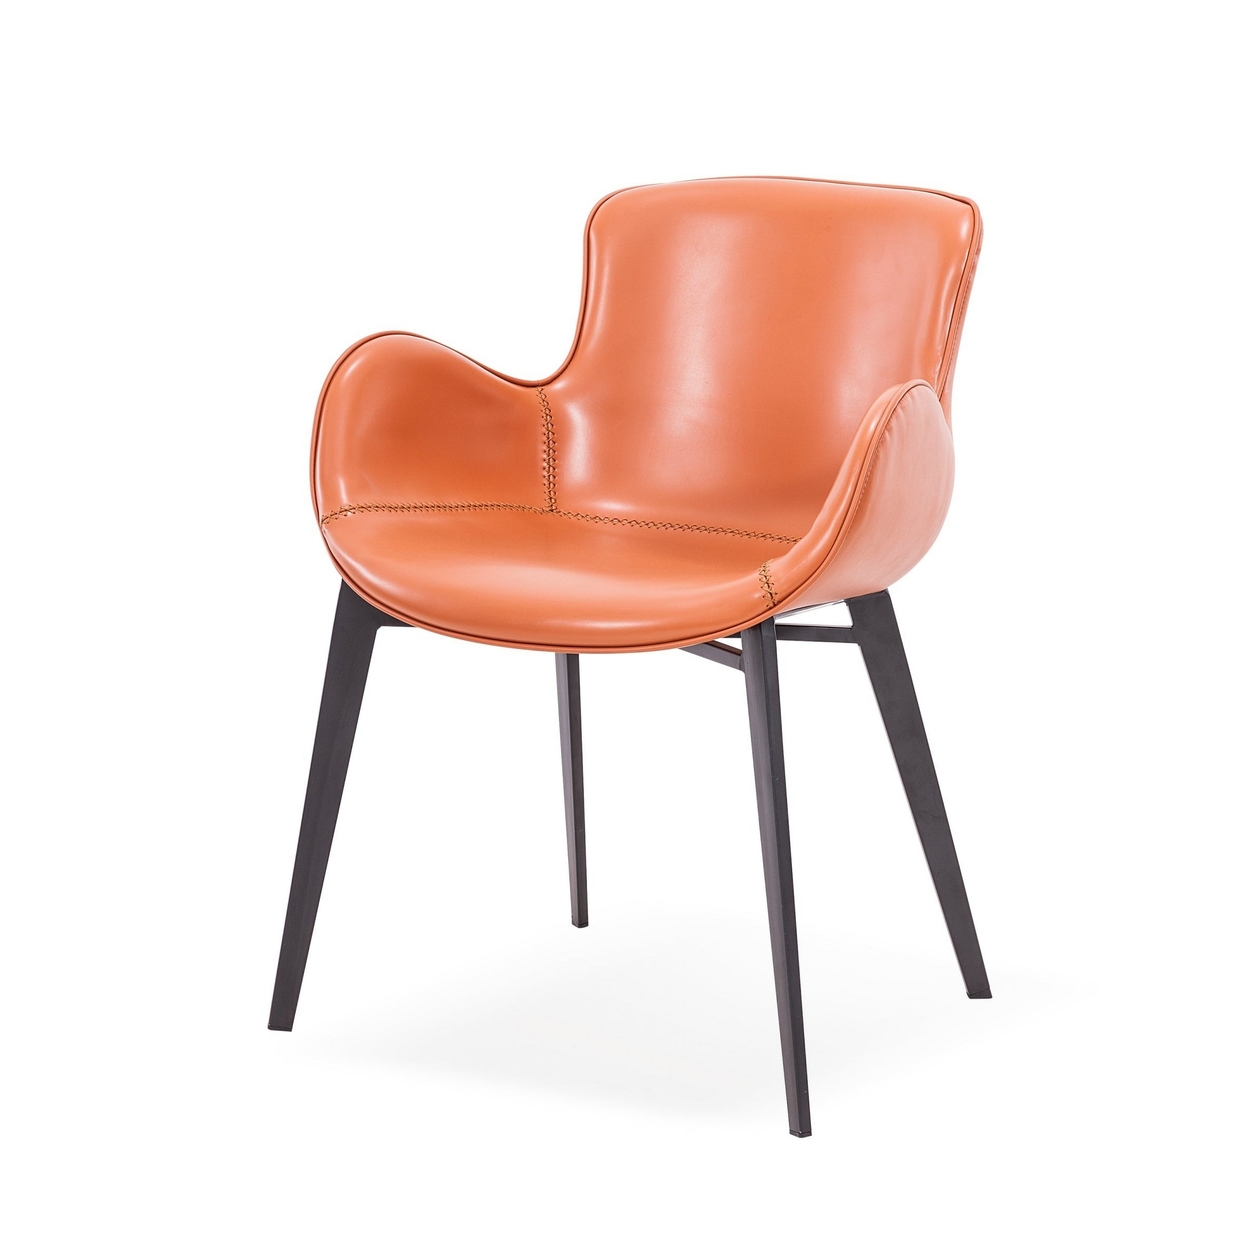 23 Inch Dining Chair, Curved Seat And Backrest, Orange Vegan Faux Leather- Saltoro Sherpi